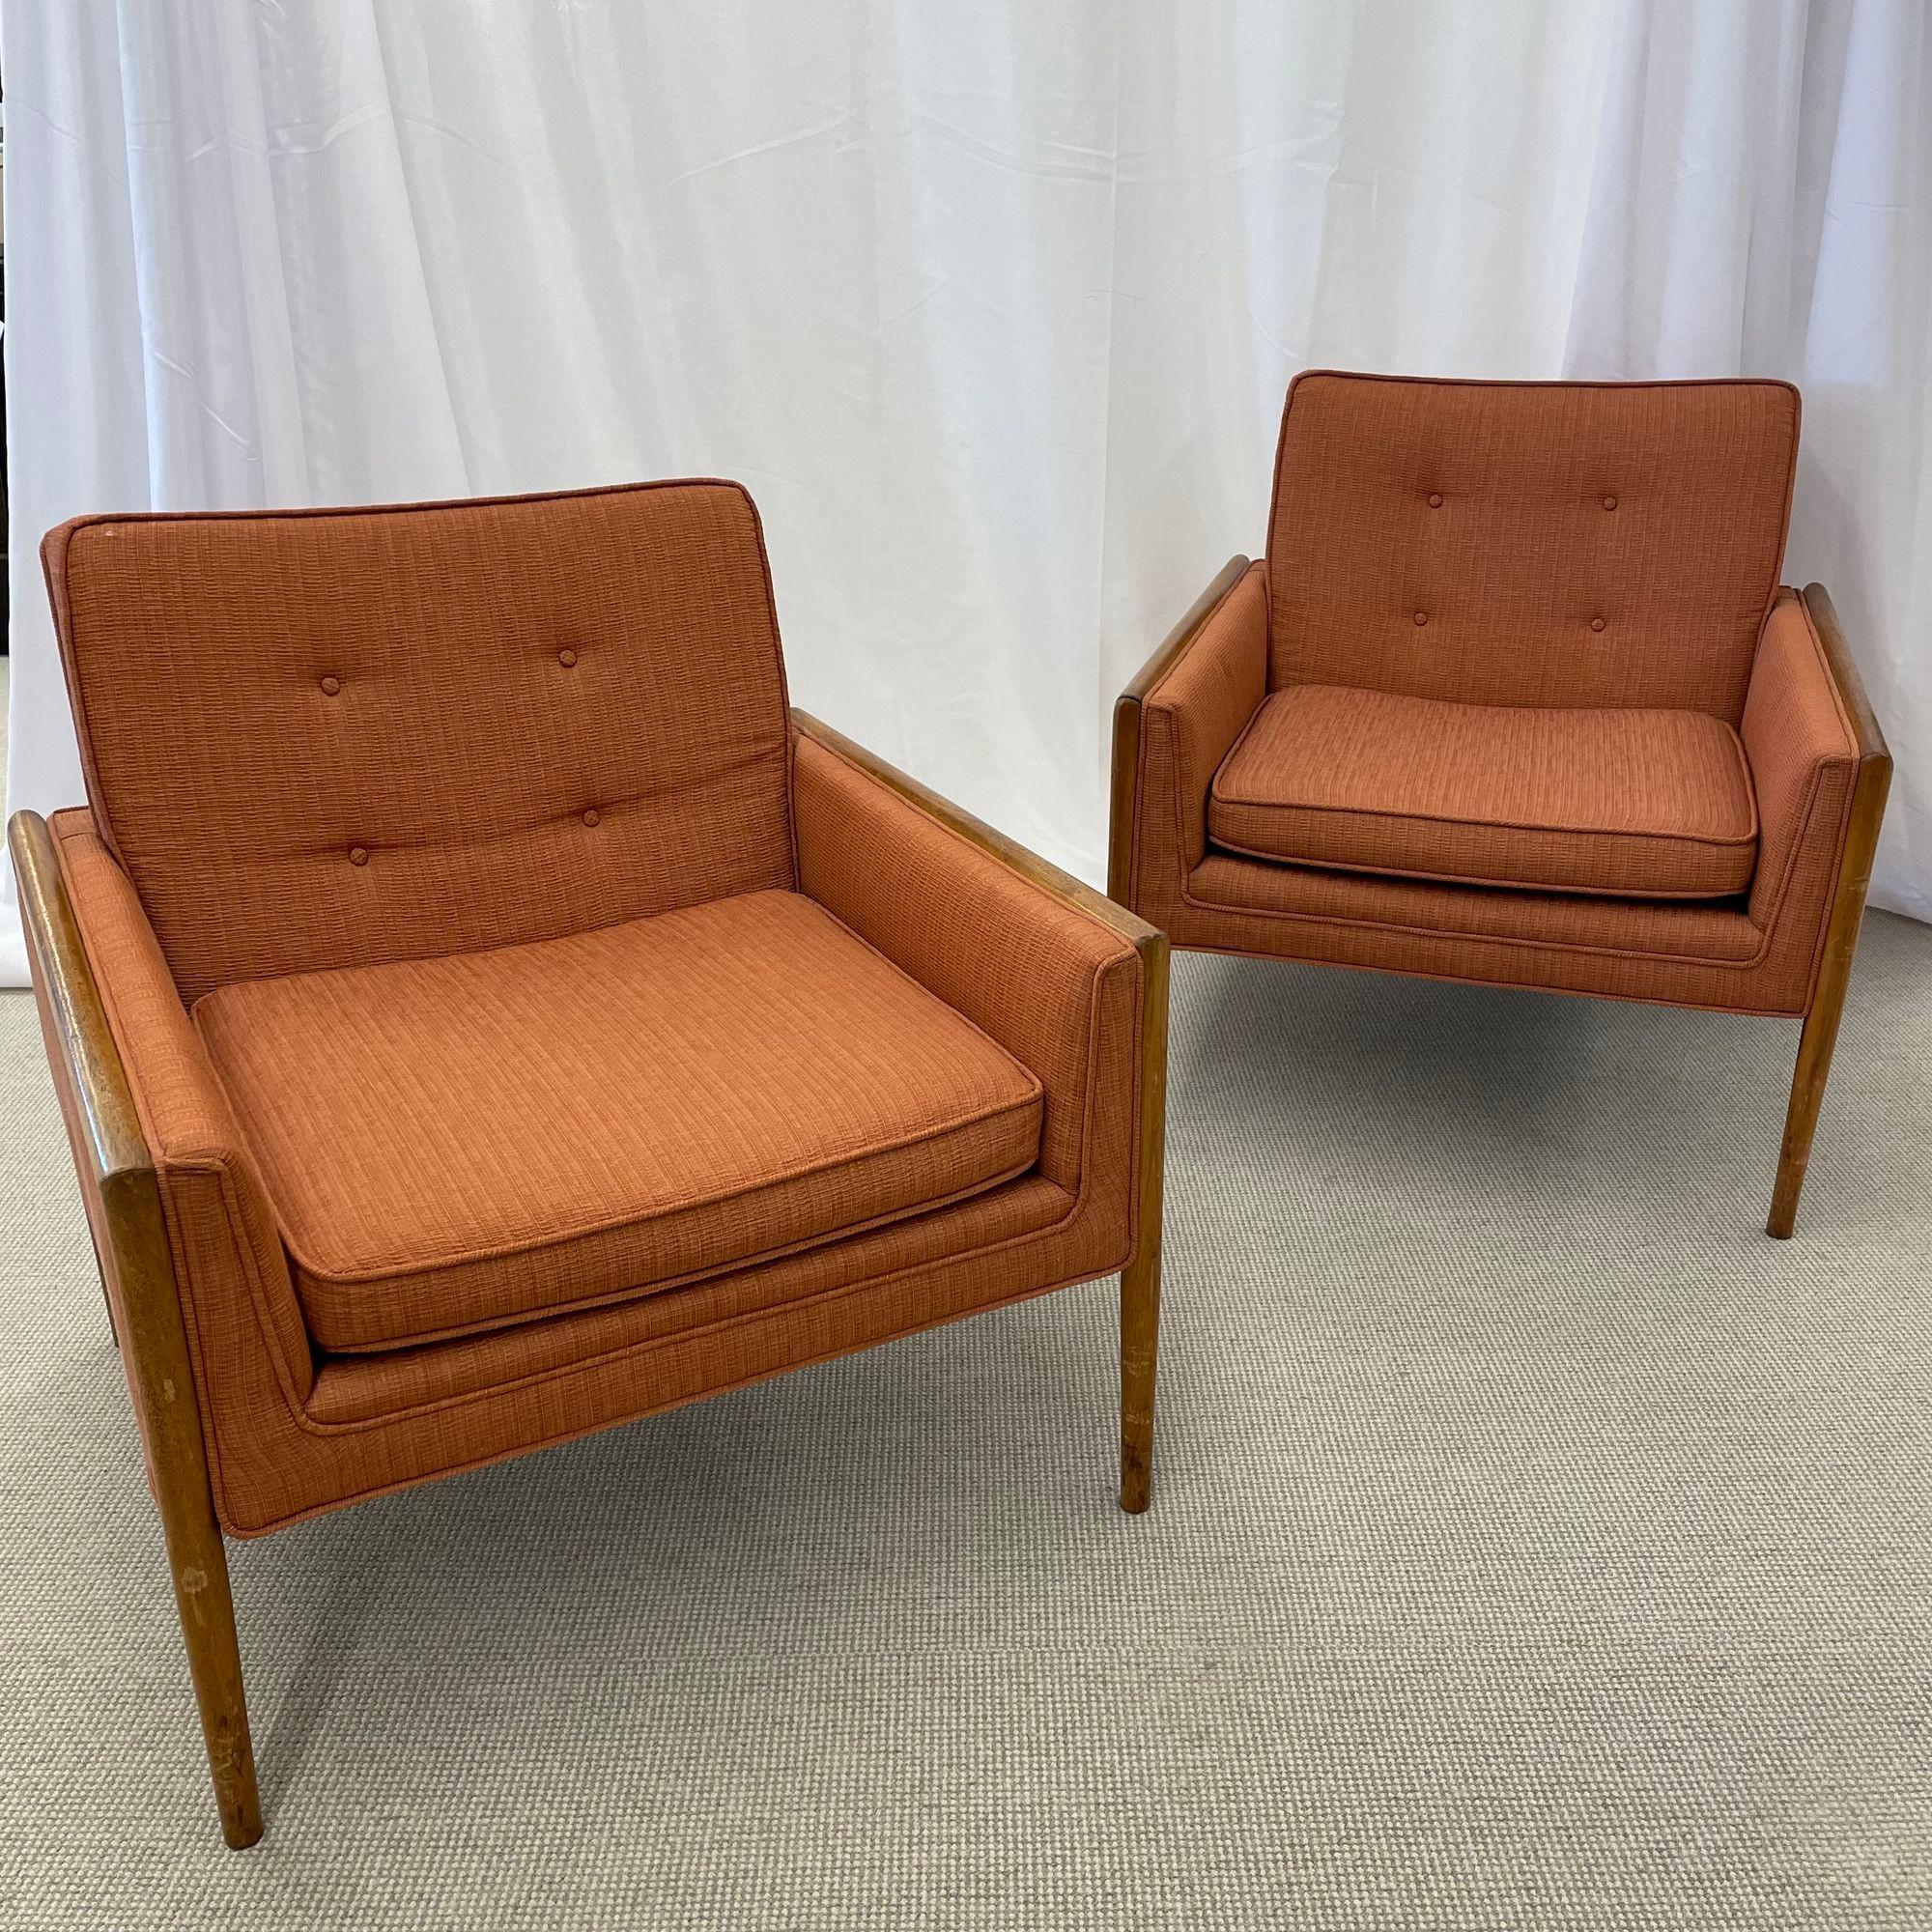 Fabric Pair of Mid-Century Modern Lounge Chairs, American, Walnut, 1960s For Sale